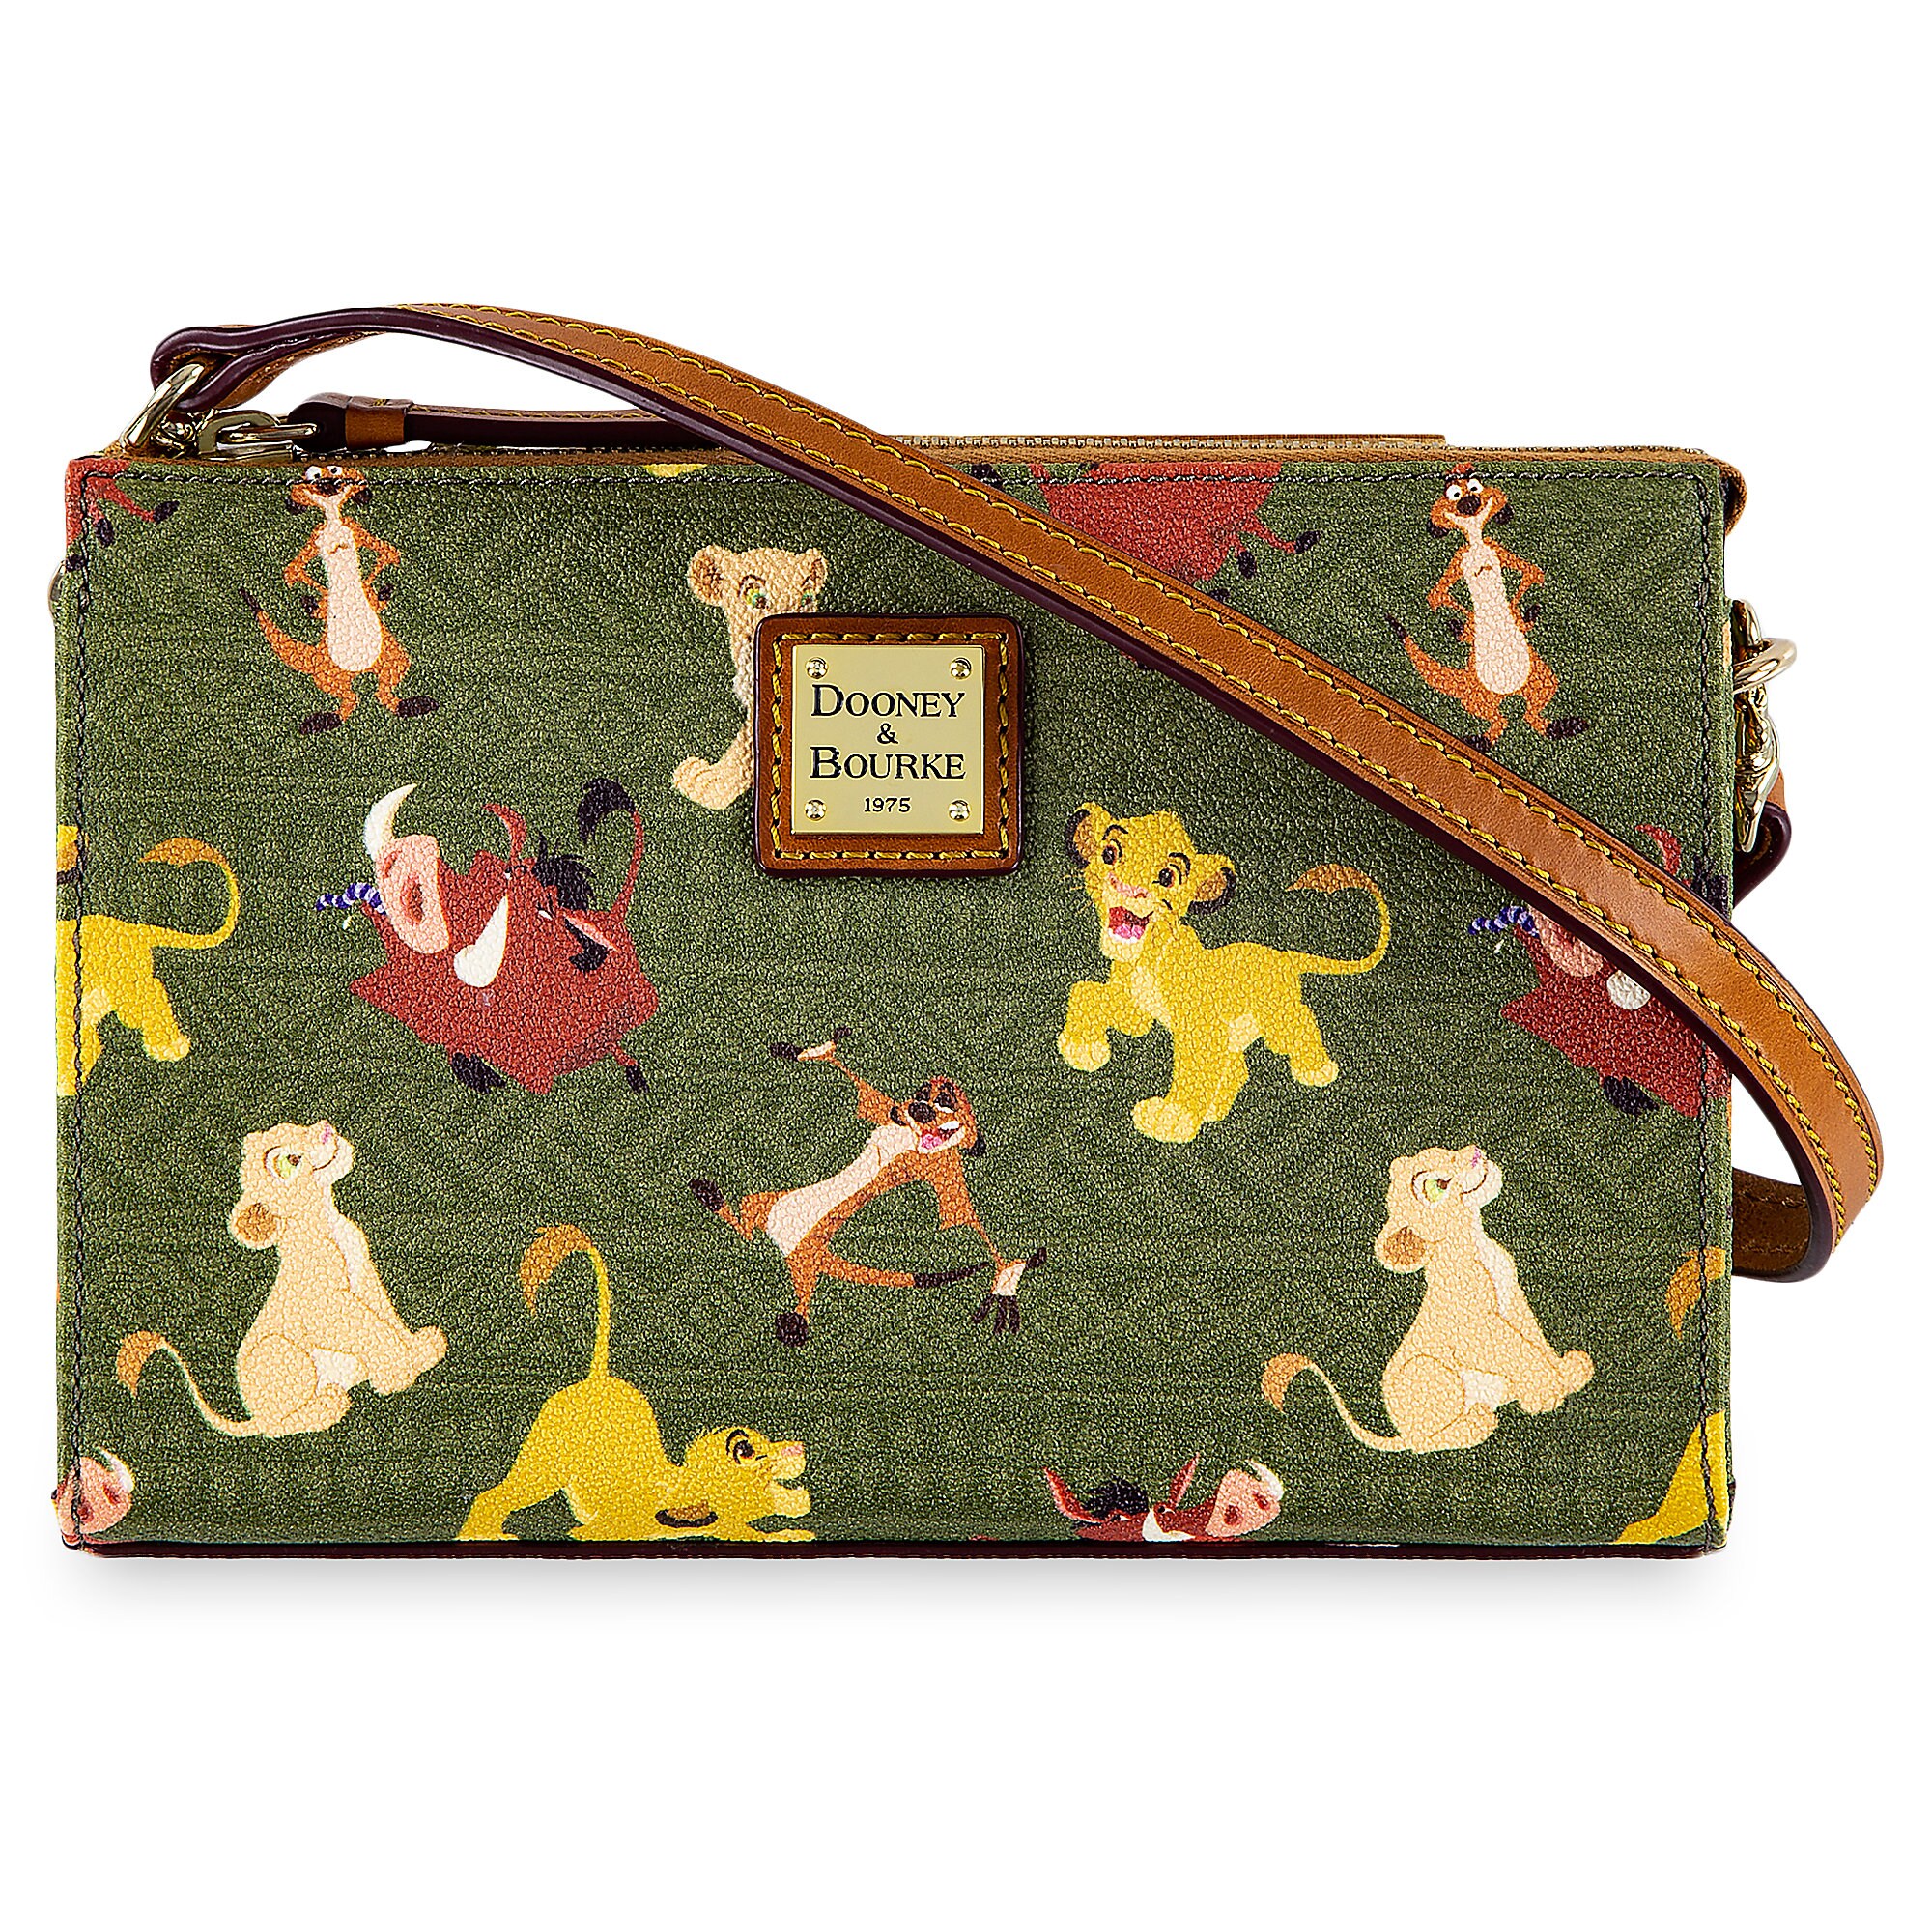 The Lion King Crossbody Bag by Dooney & Bourke was released today Dis